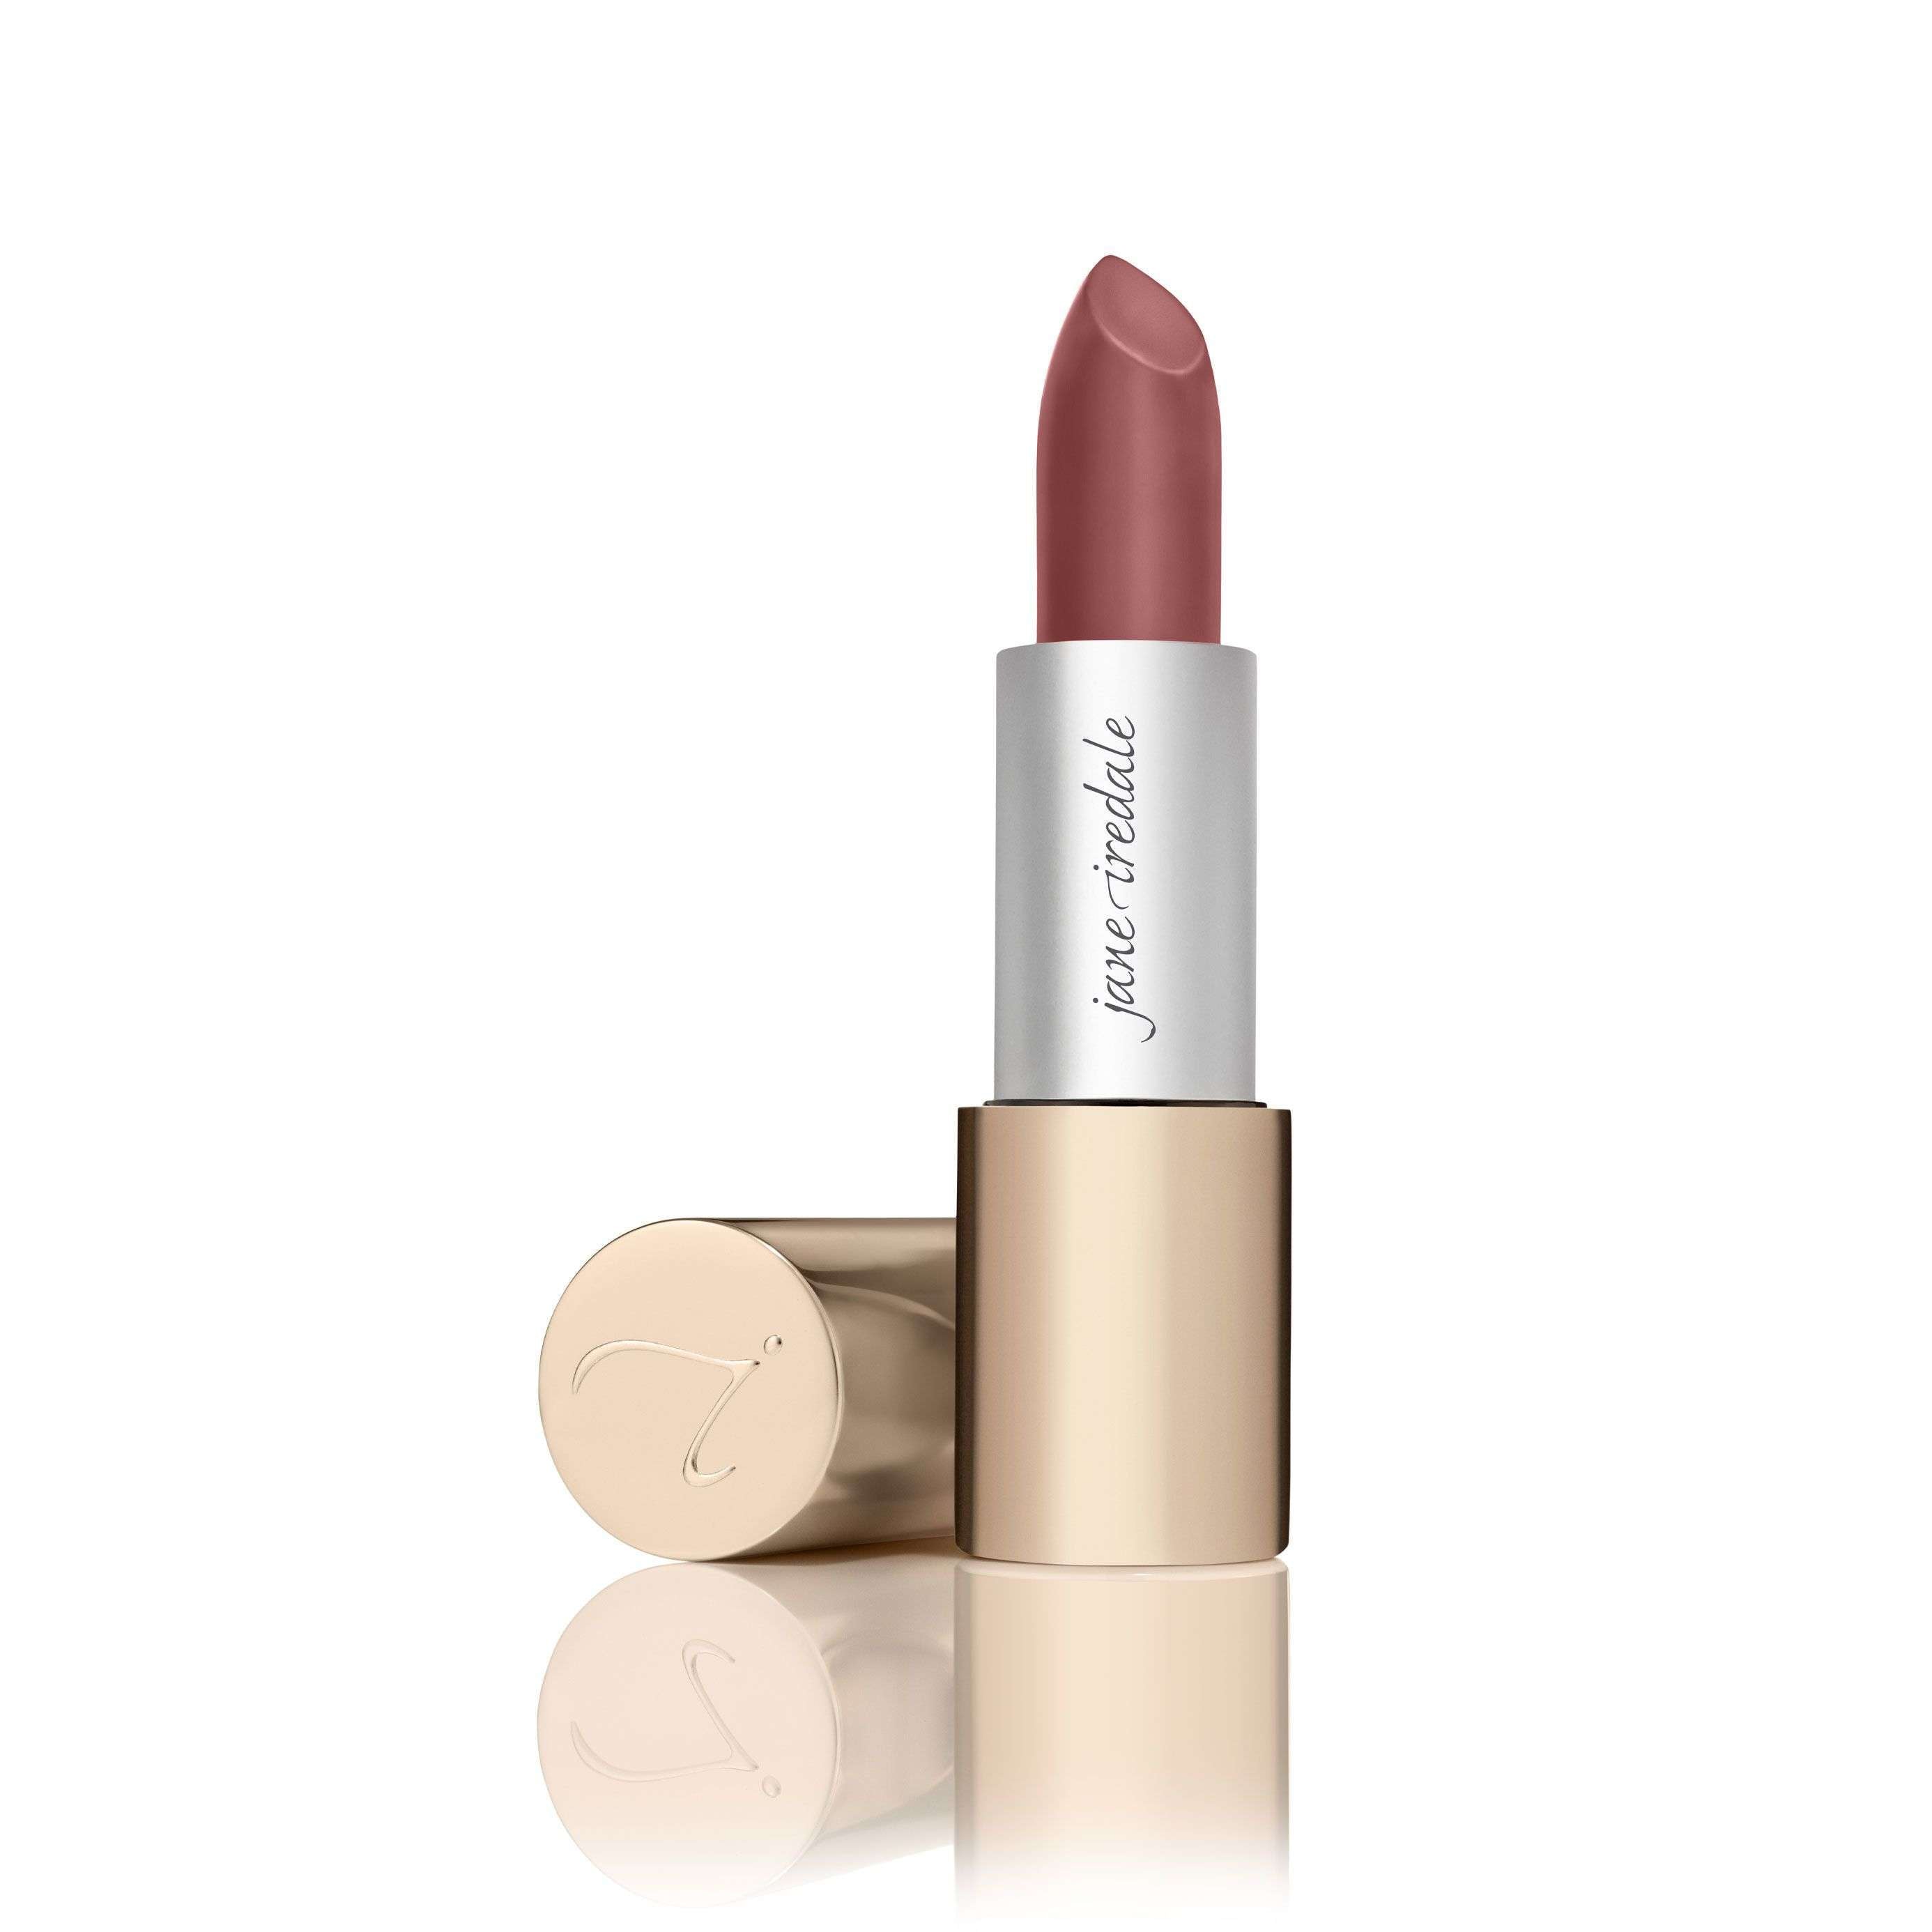 Jane Iredale Triple Luxe Long Lasting Naturally Moist Lipstick™ at Socialite Beauty Canada